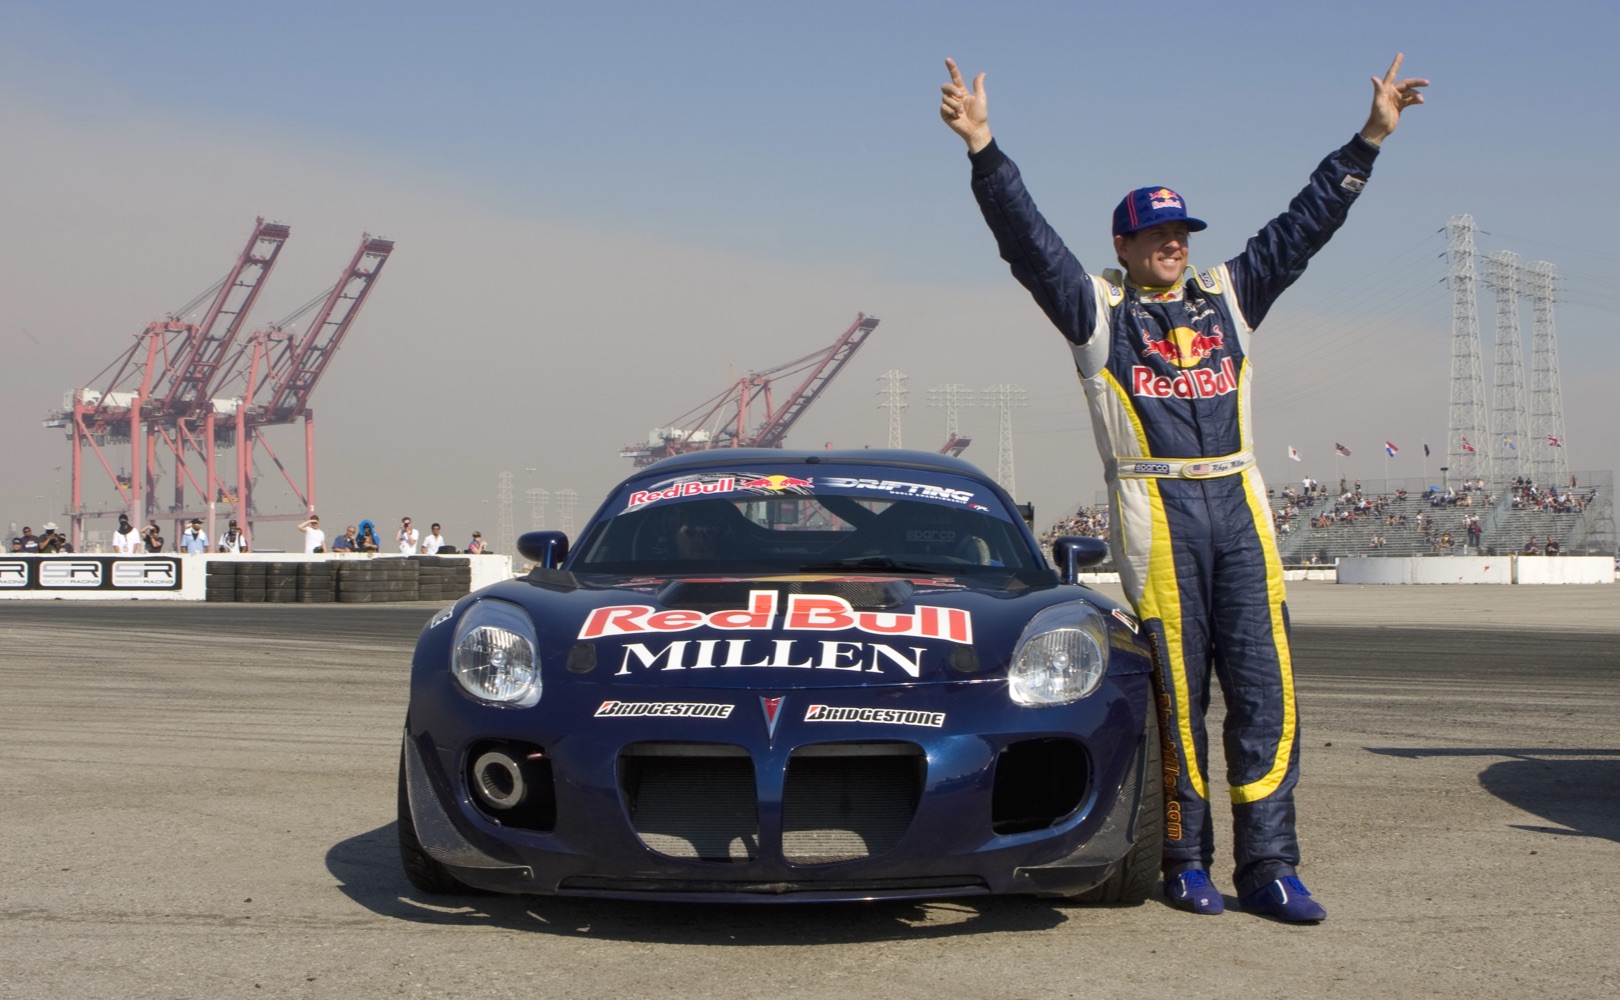 redbull drifting branding outdoor event promotional signage 2